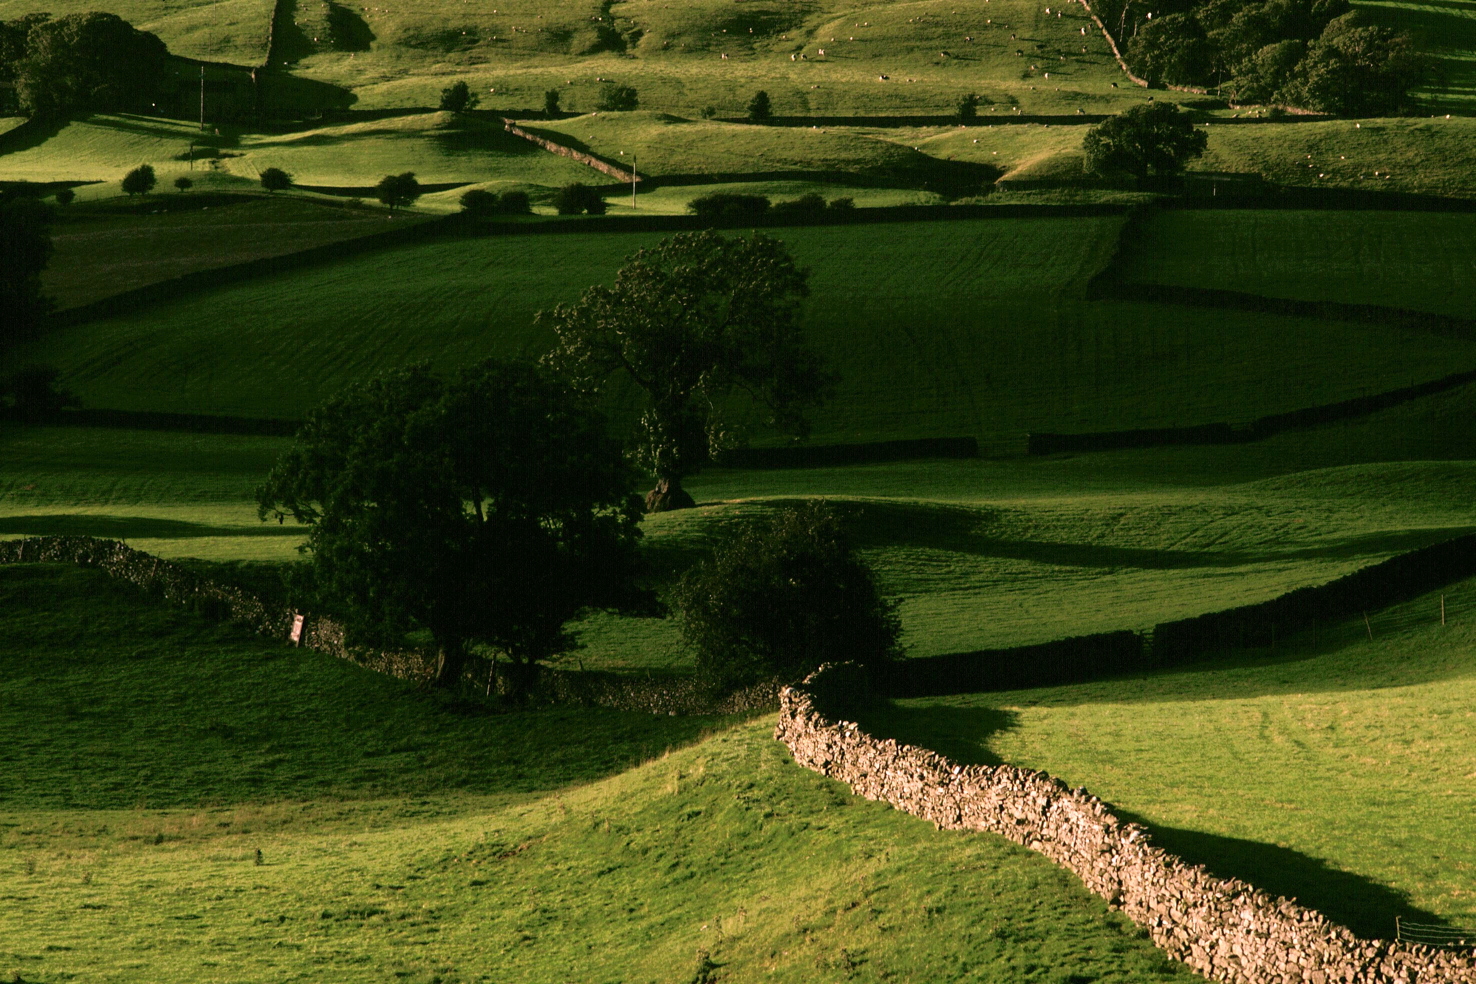 Near Hawes, late afternoon.